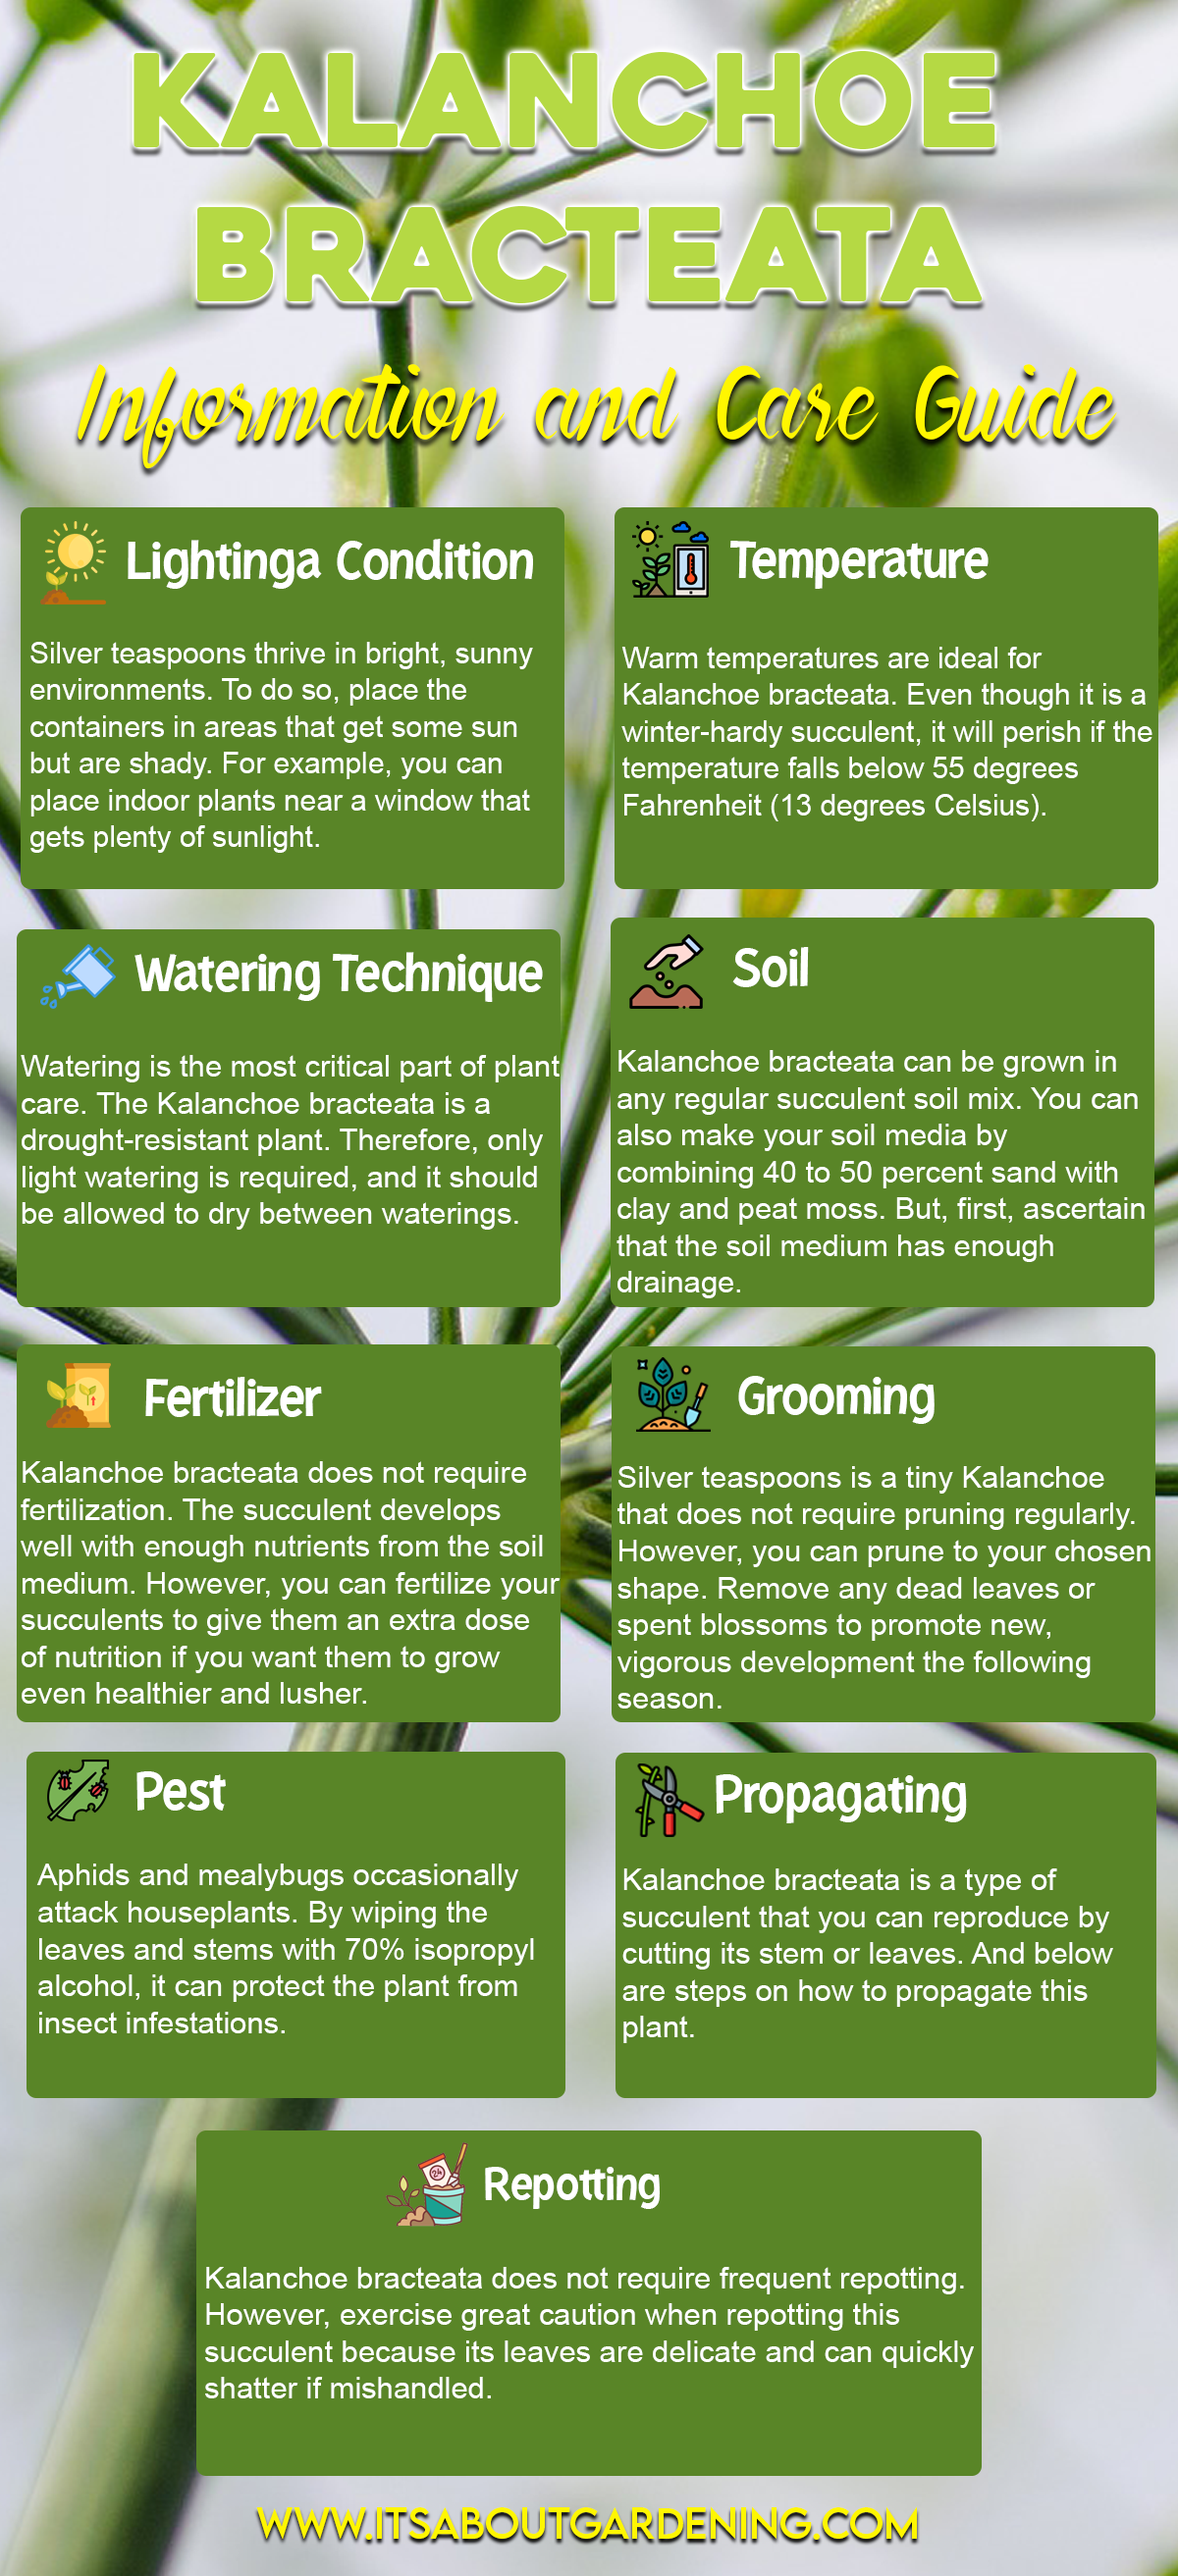 Kalanchoe Bracteata Information and Care Guide Infographic